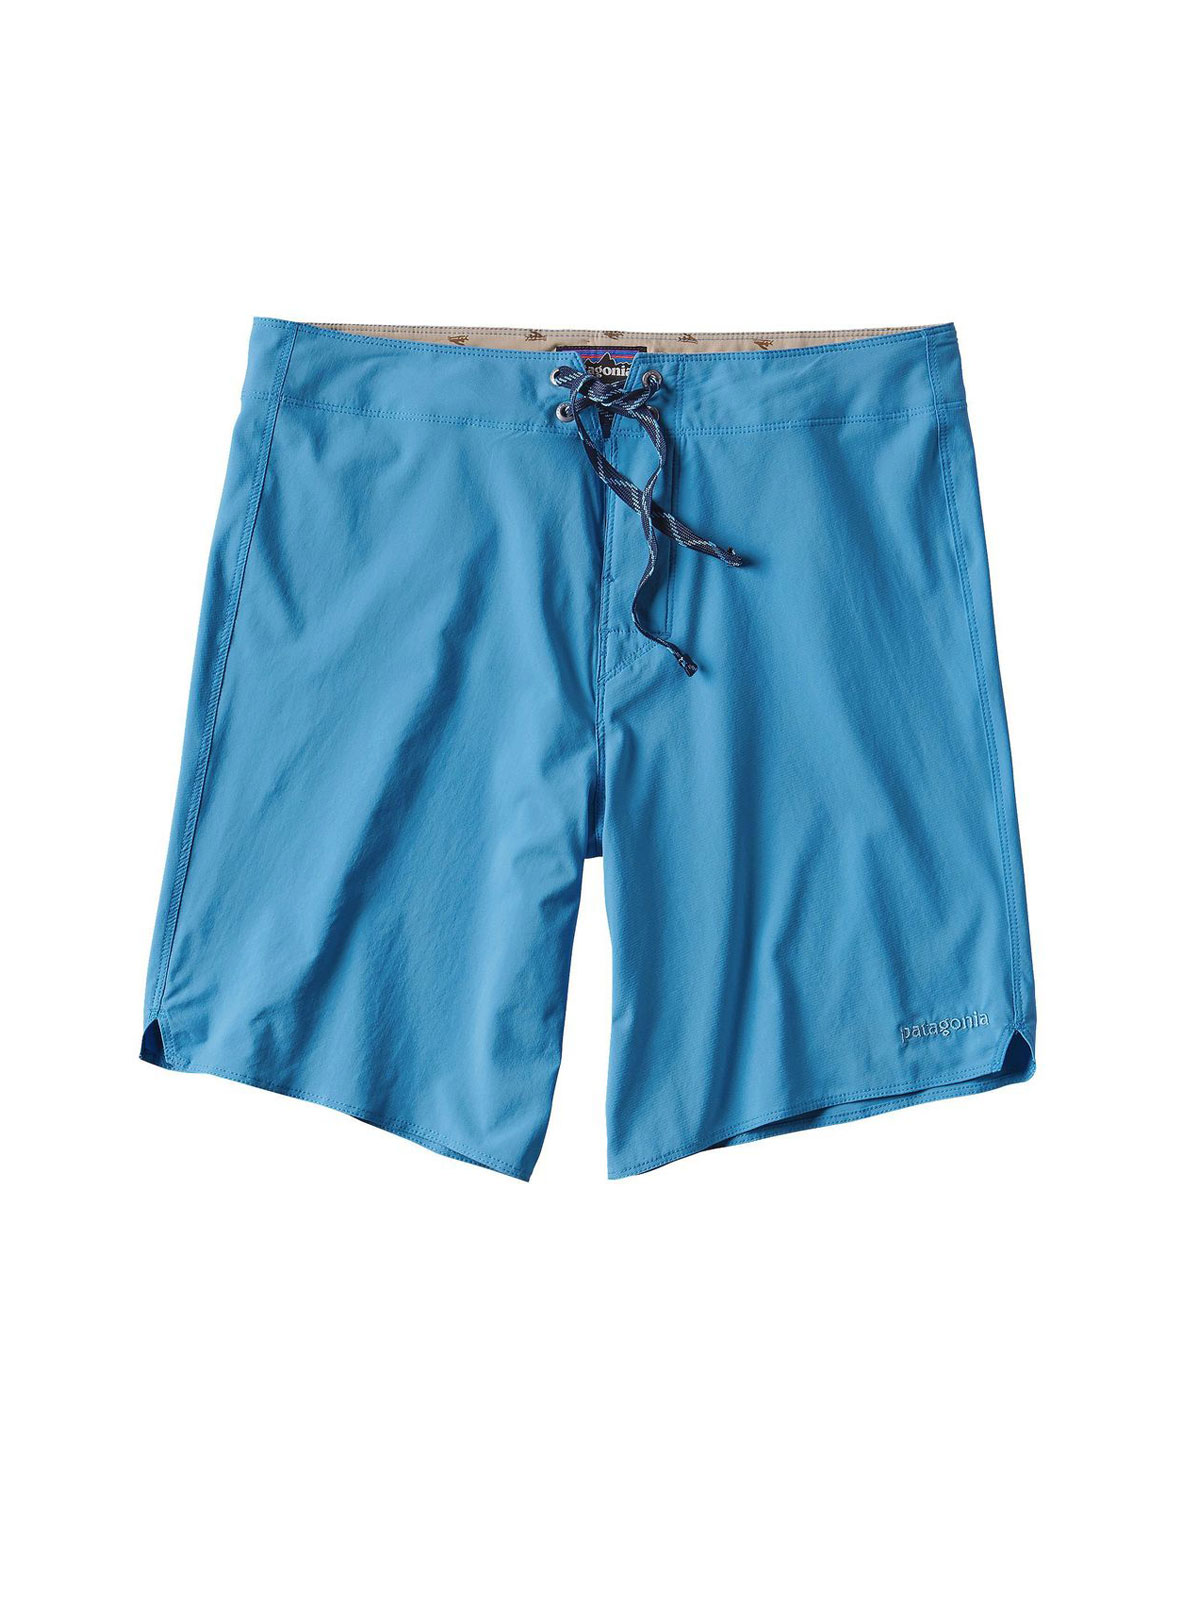 Patagona Trunks Review